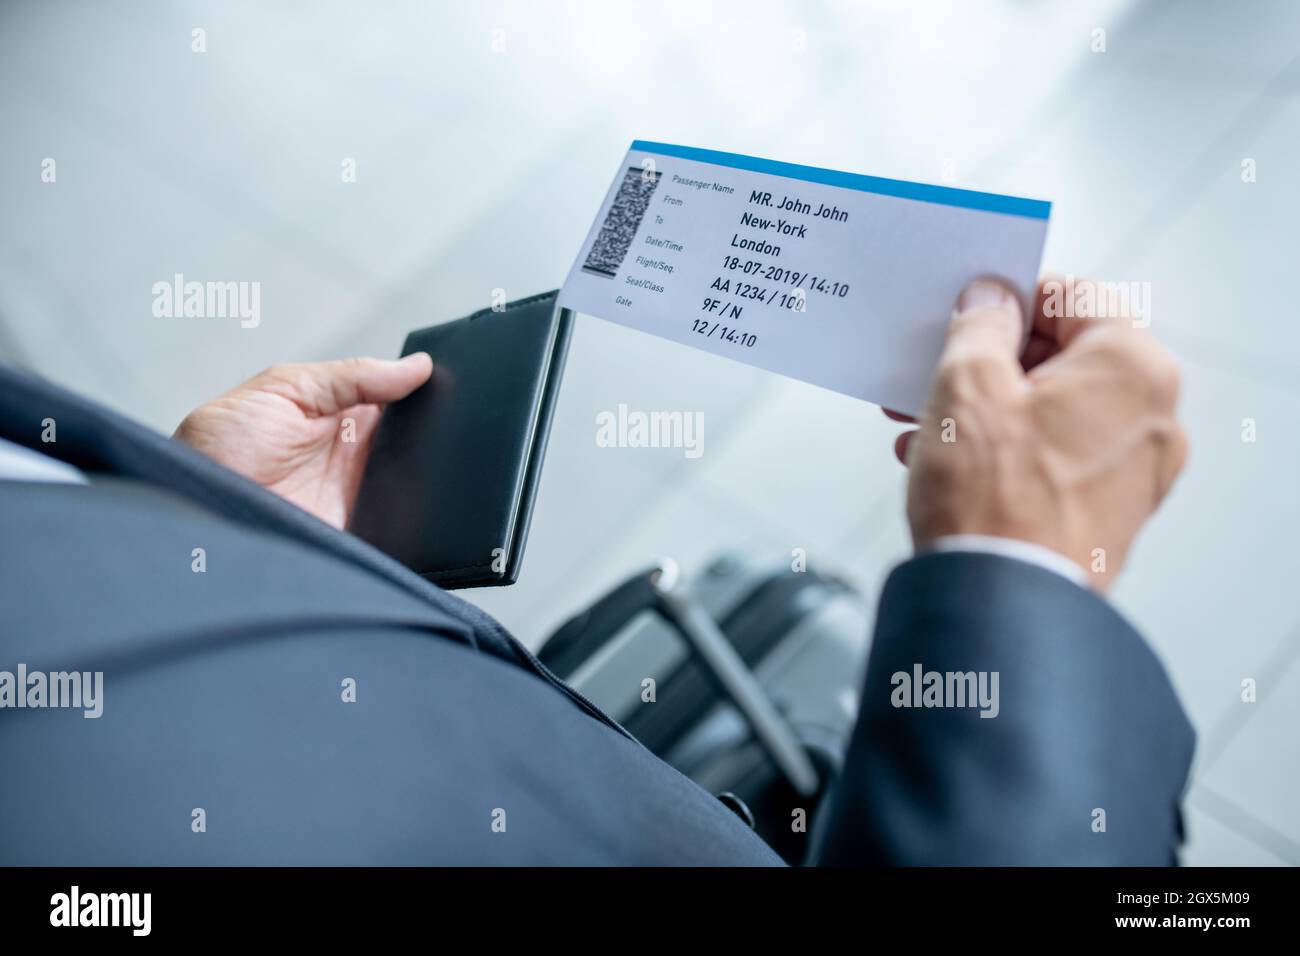 Male hands holding passport and plane ticket Stock Photo